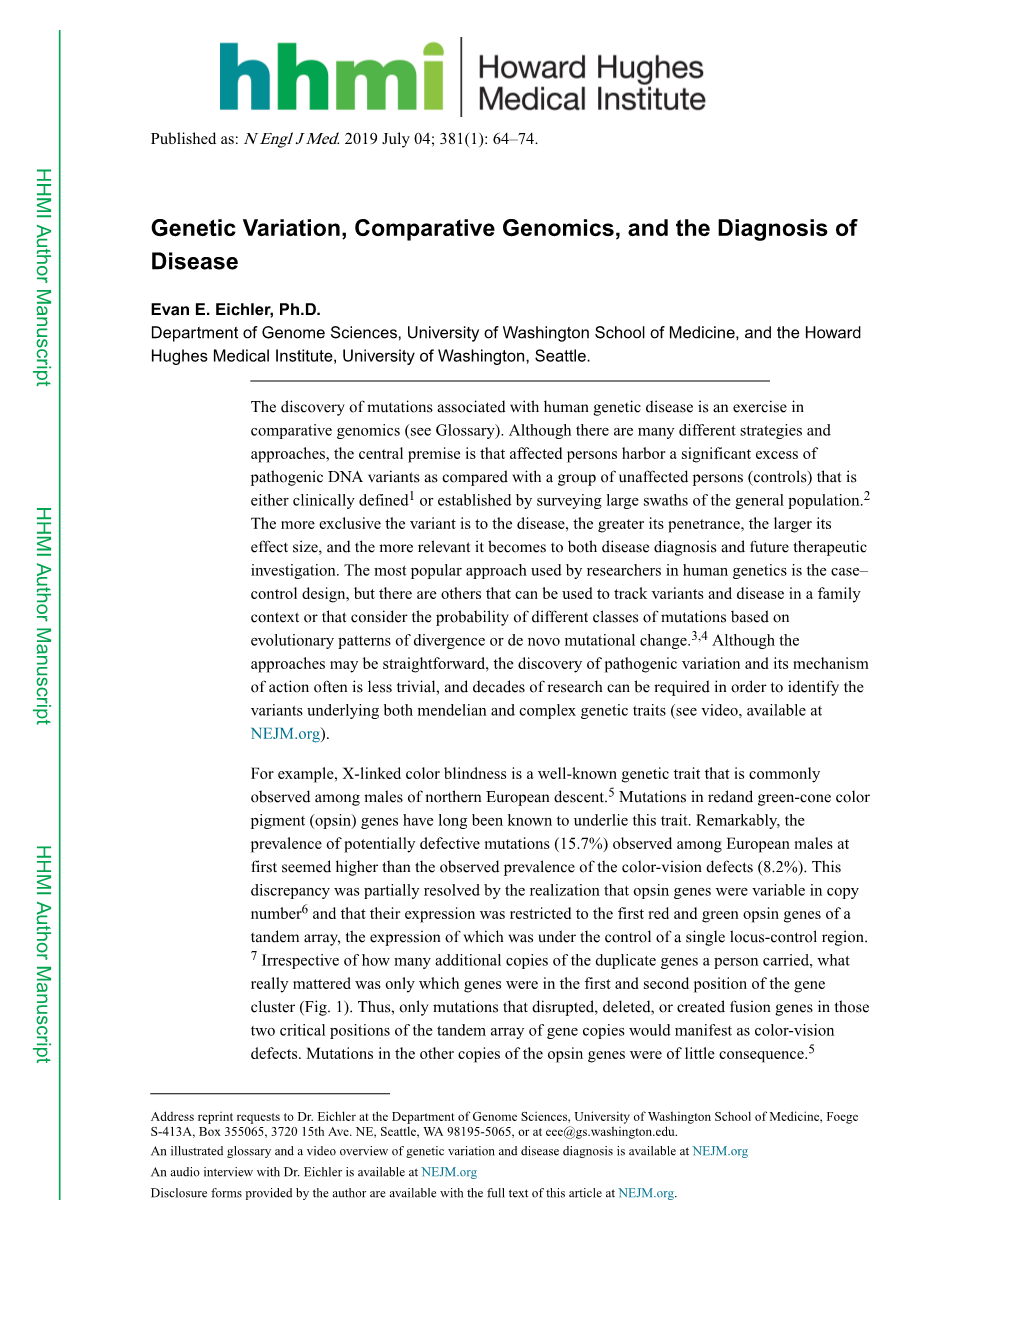 Genetic Variation, Comparative Genomics, and the Diagnosis of Disease